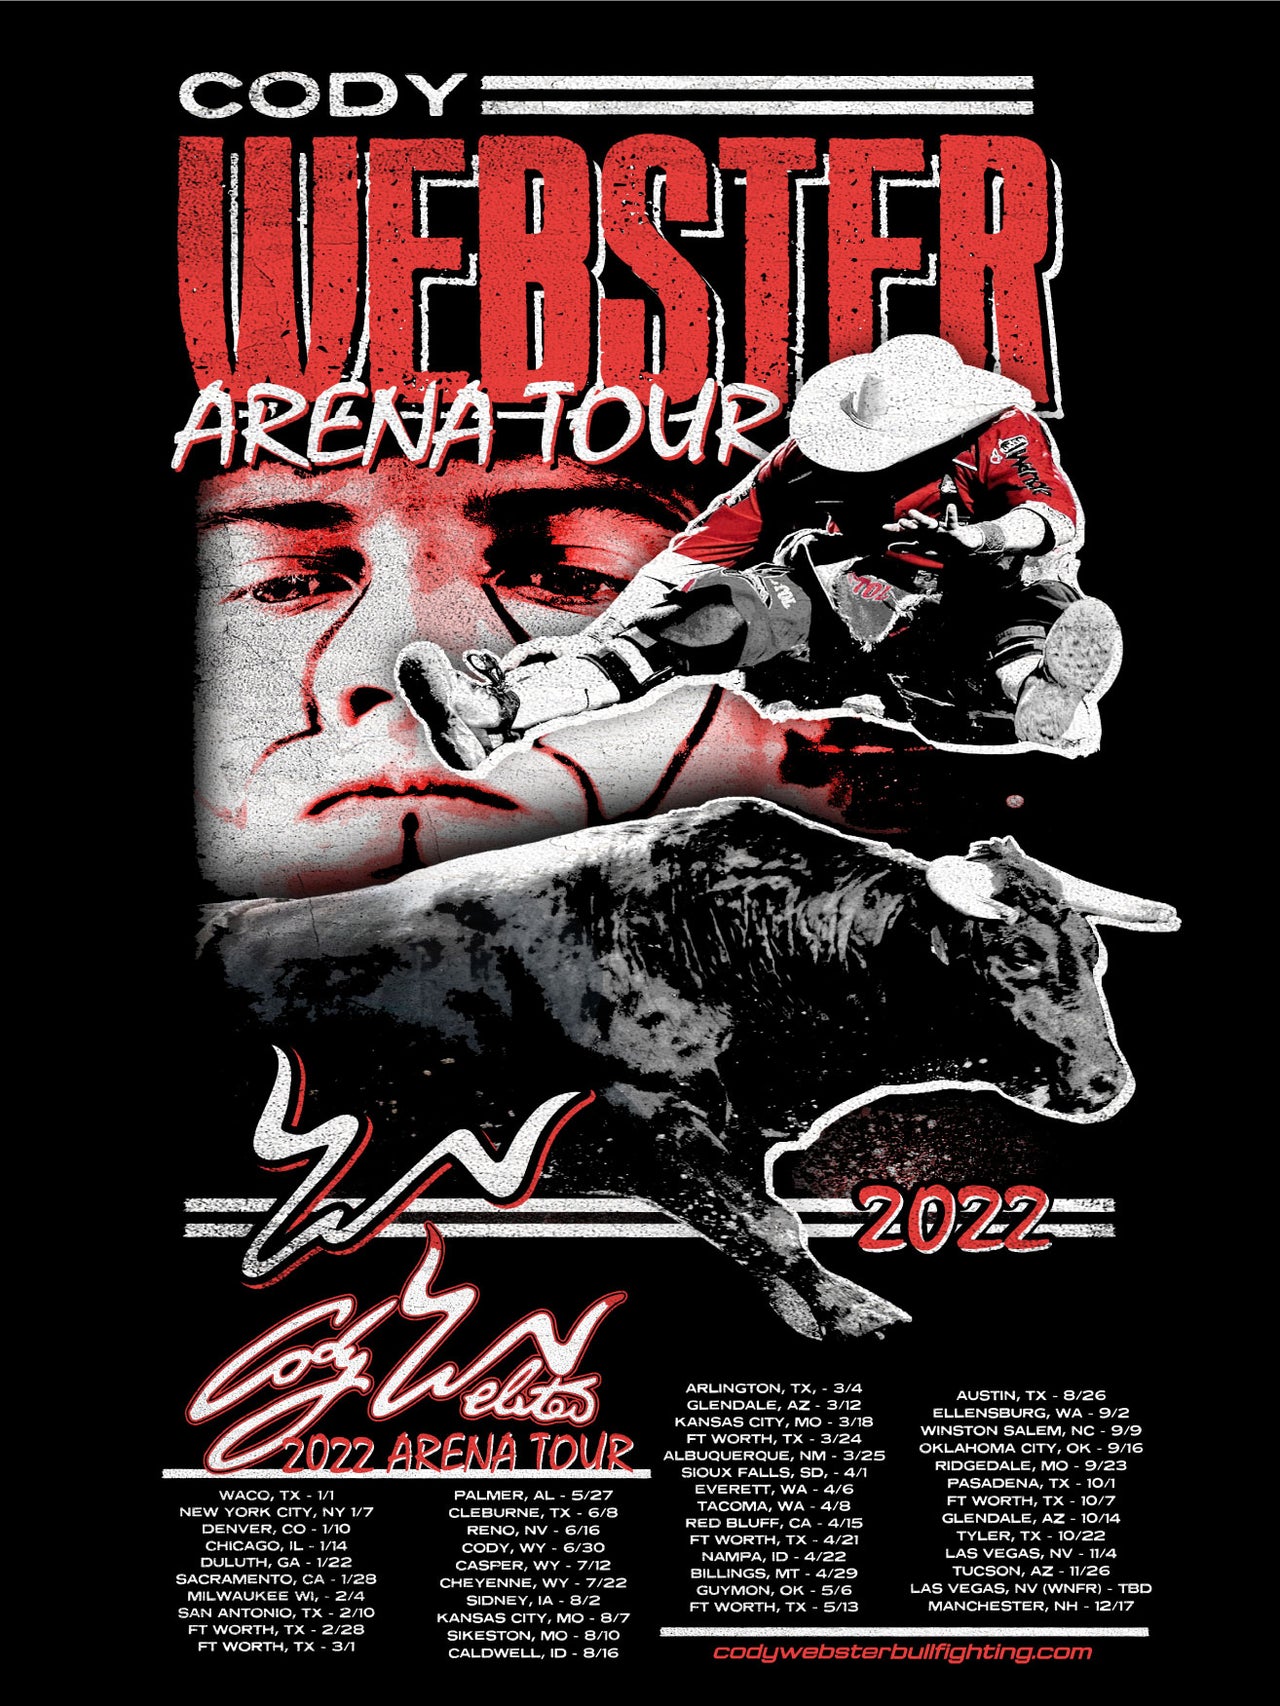 *Signed* Cody Webster Arena Tour Poster